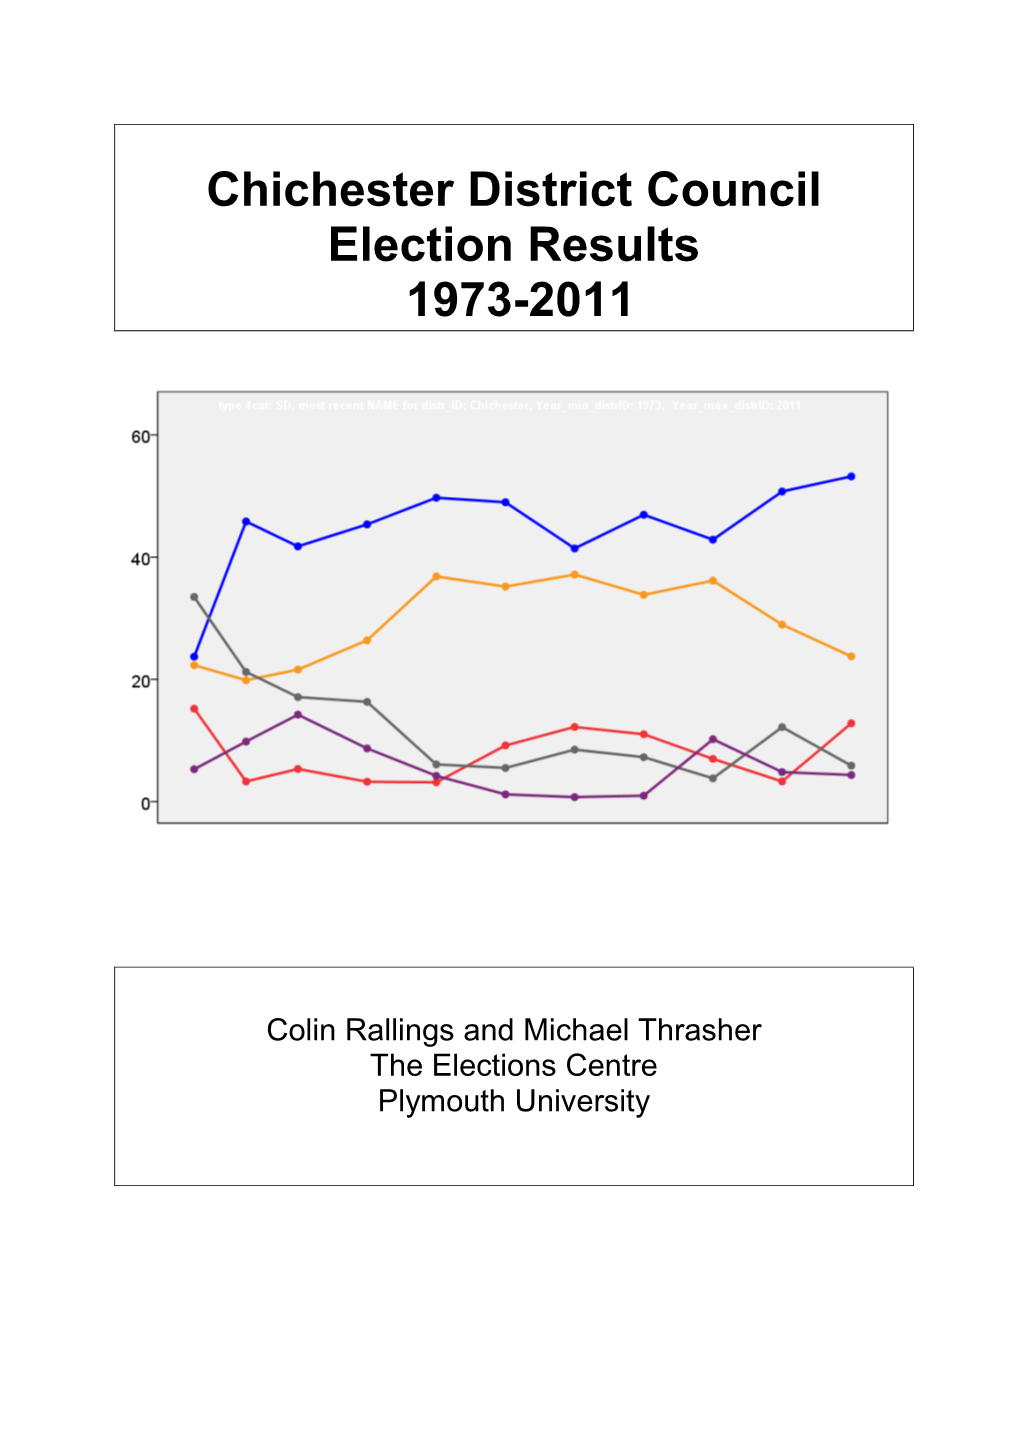 Chichester District Council Election Results 1973-2011